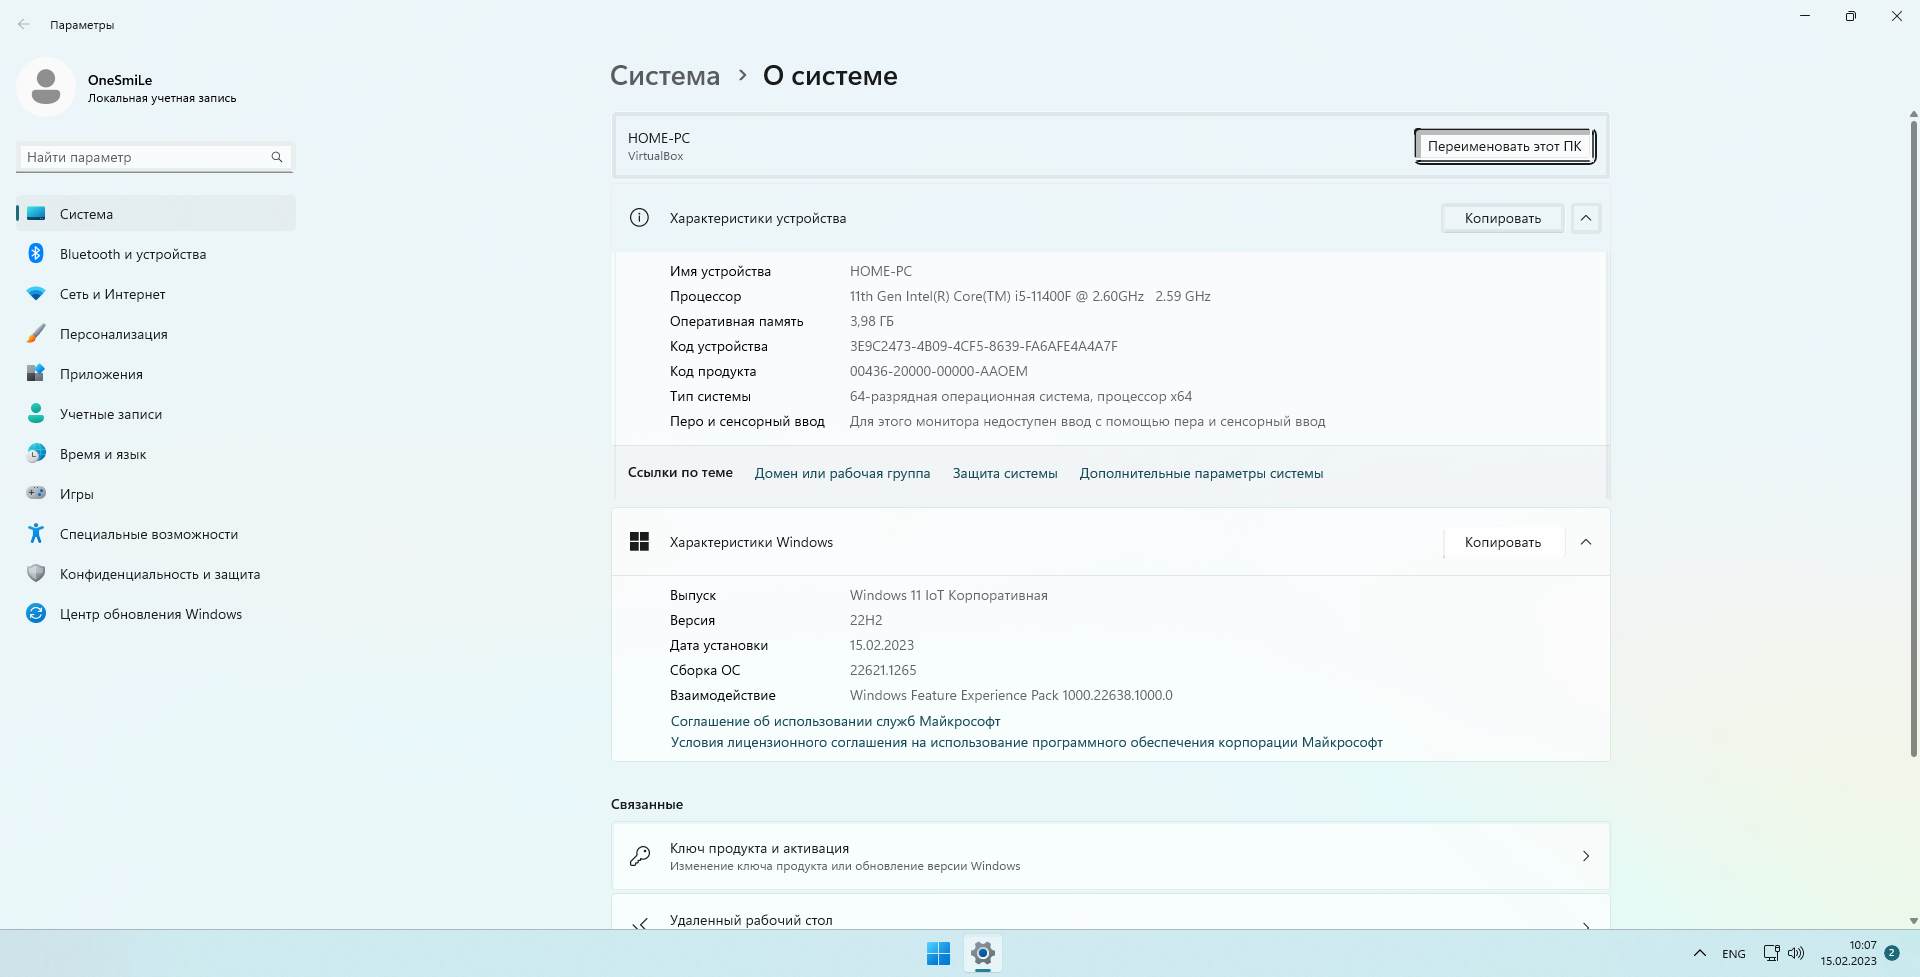 Windows 11 22H2 x64 Rus by OneSmiLe [22621.1265]